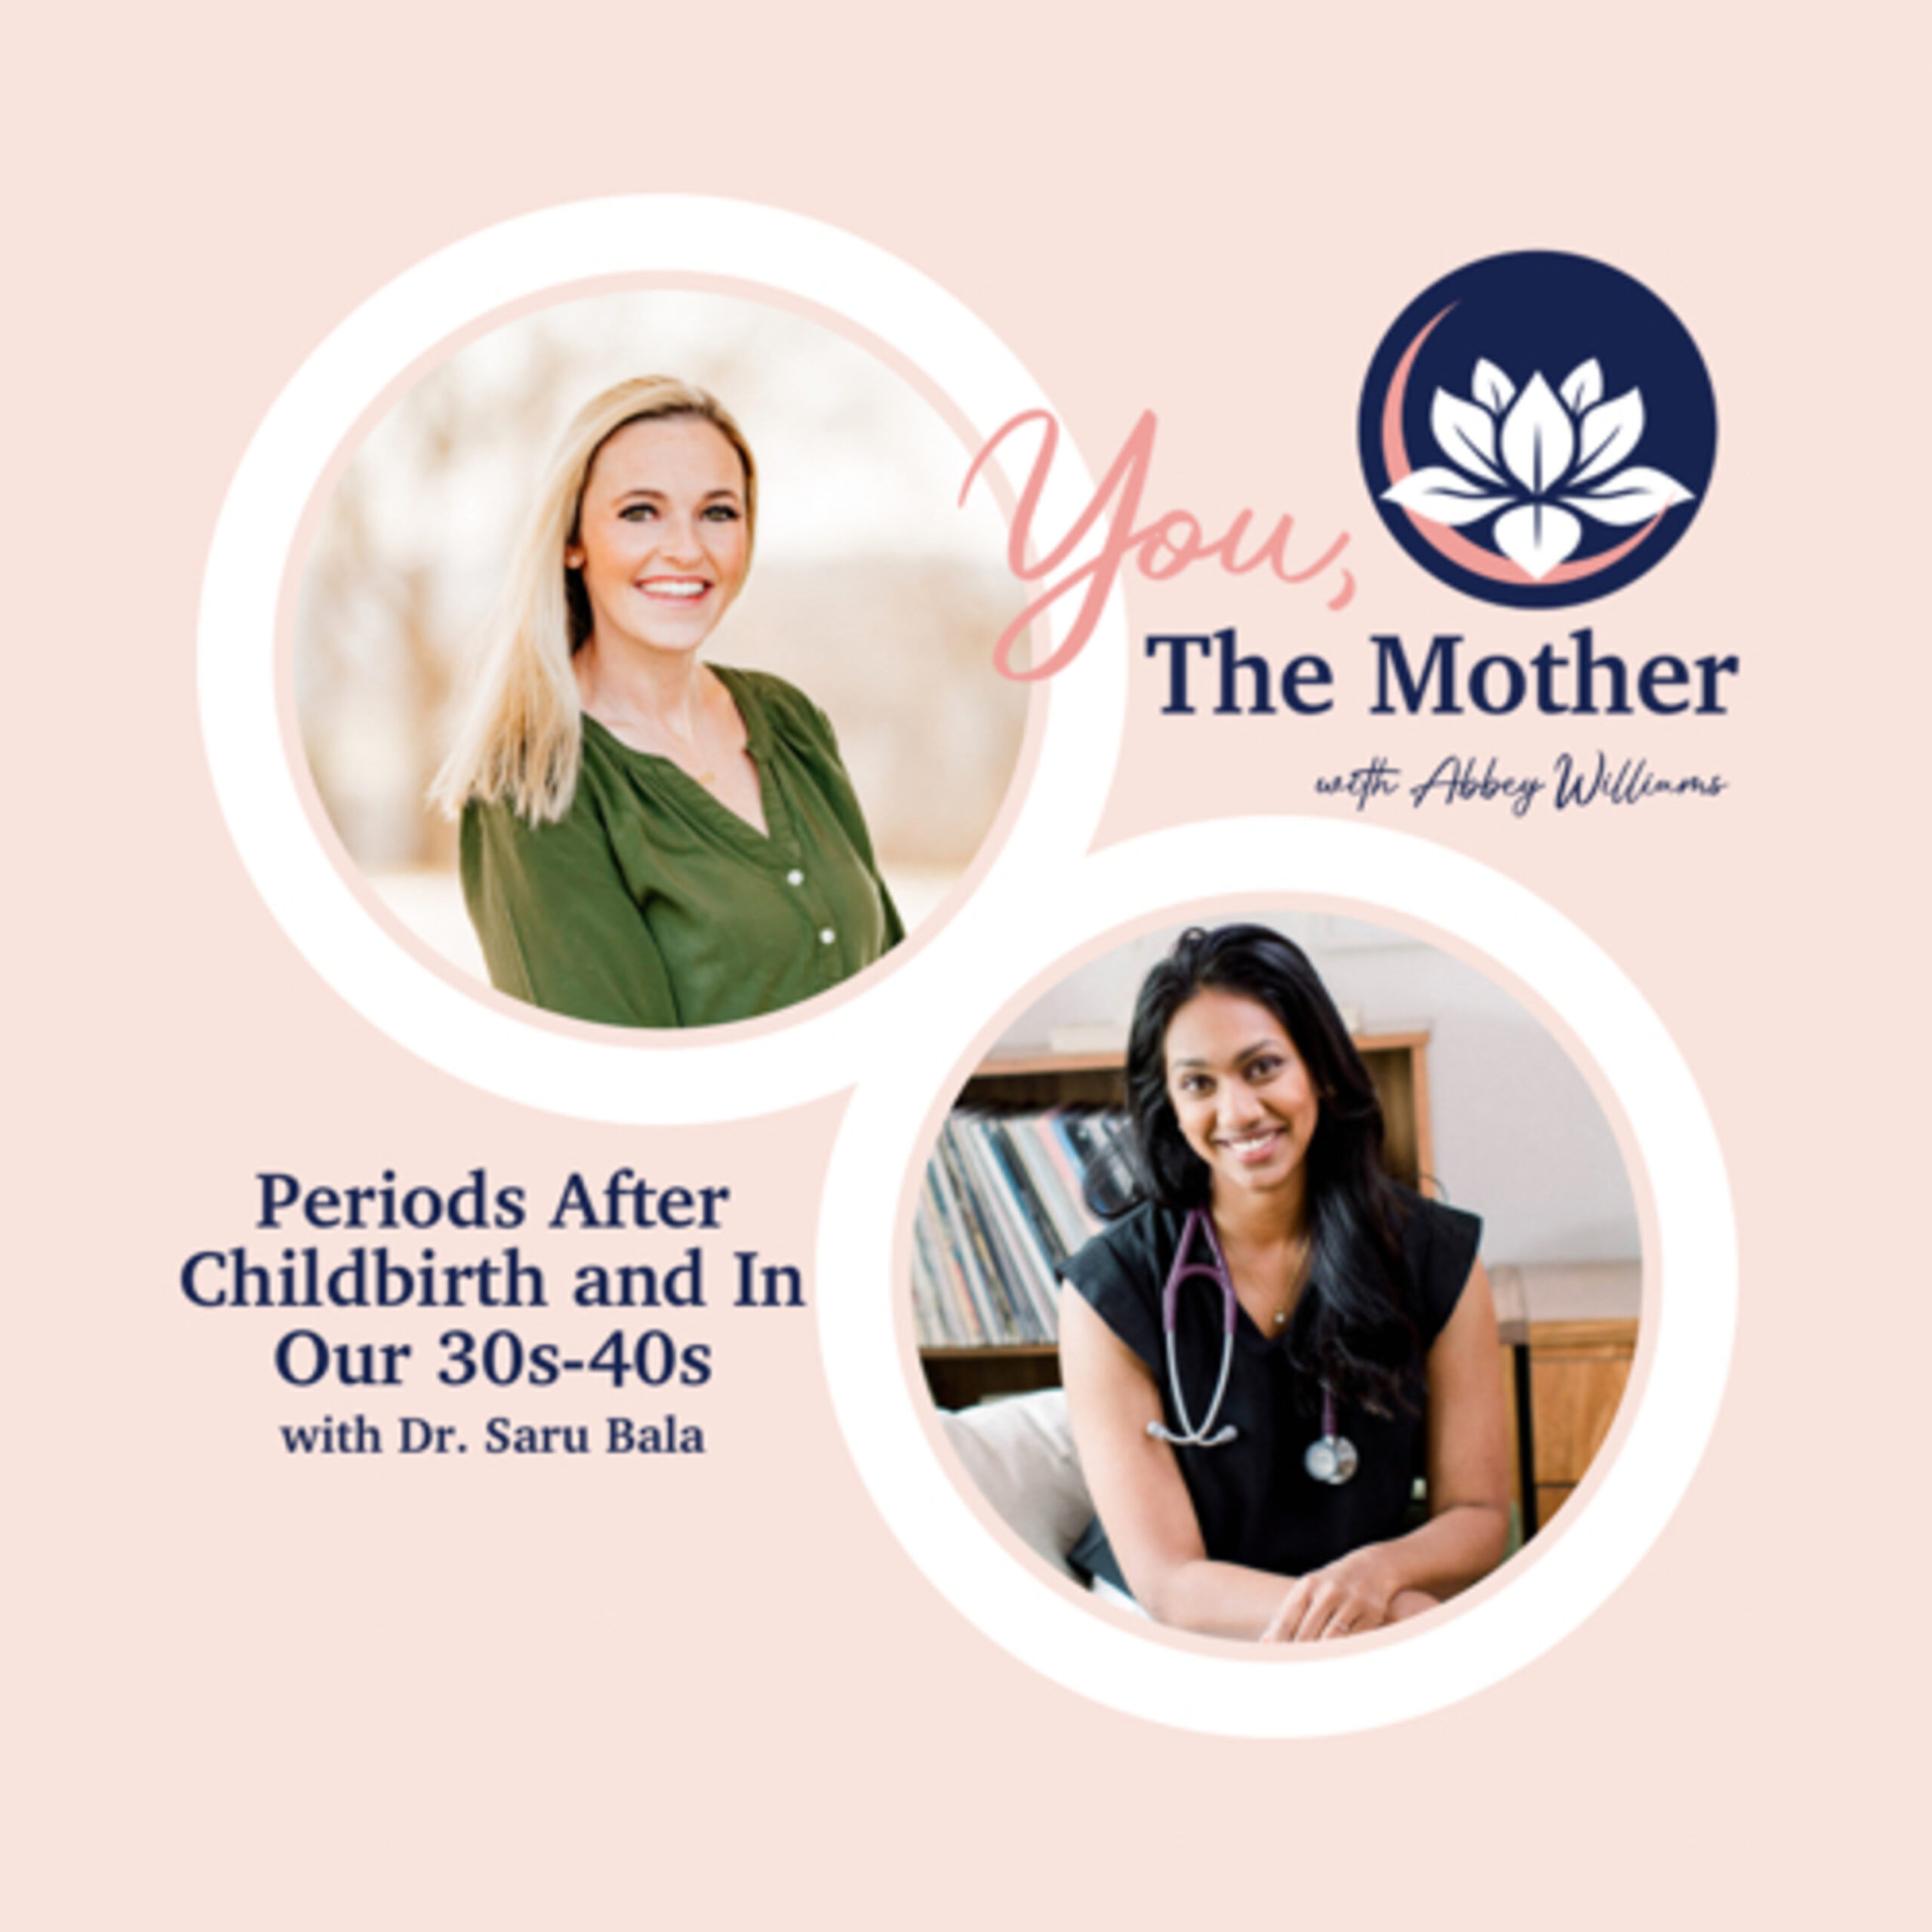 Periods After Childbirth and In Our 30s-40s with Dr Saru Bala